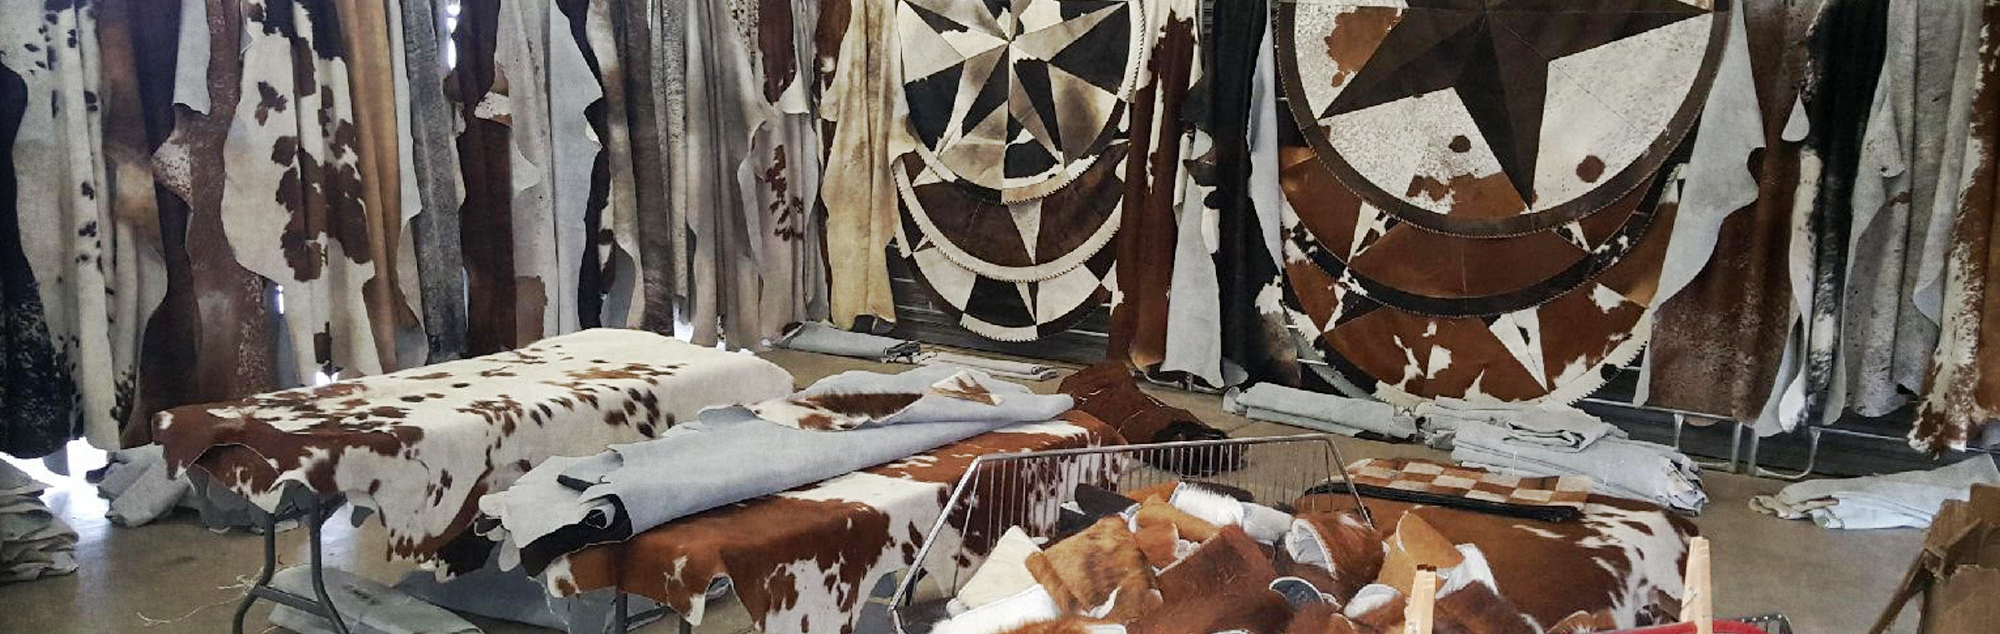  MENRIAOV Longhorn White Cowhide with Black And Brown